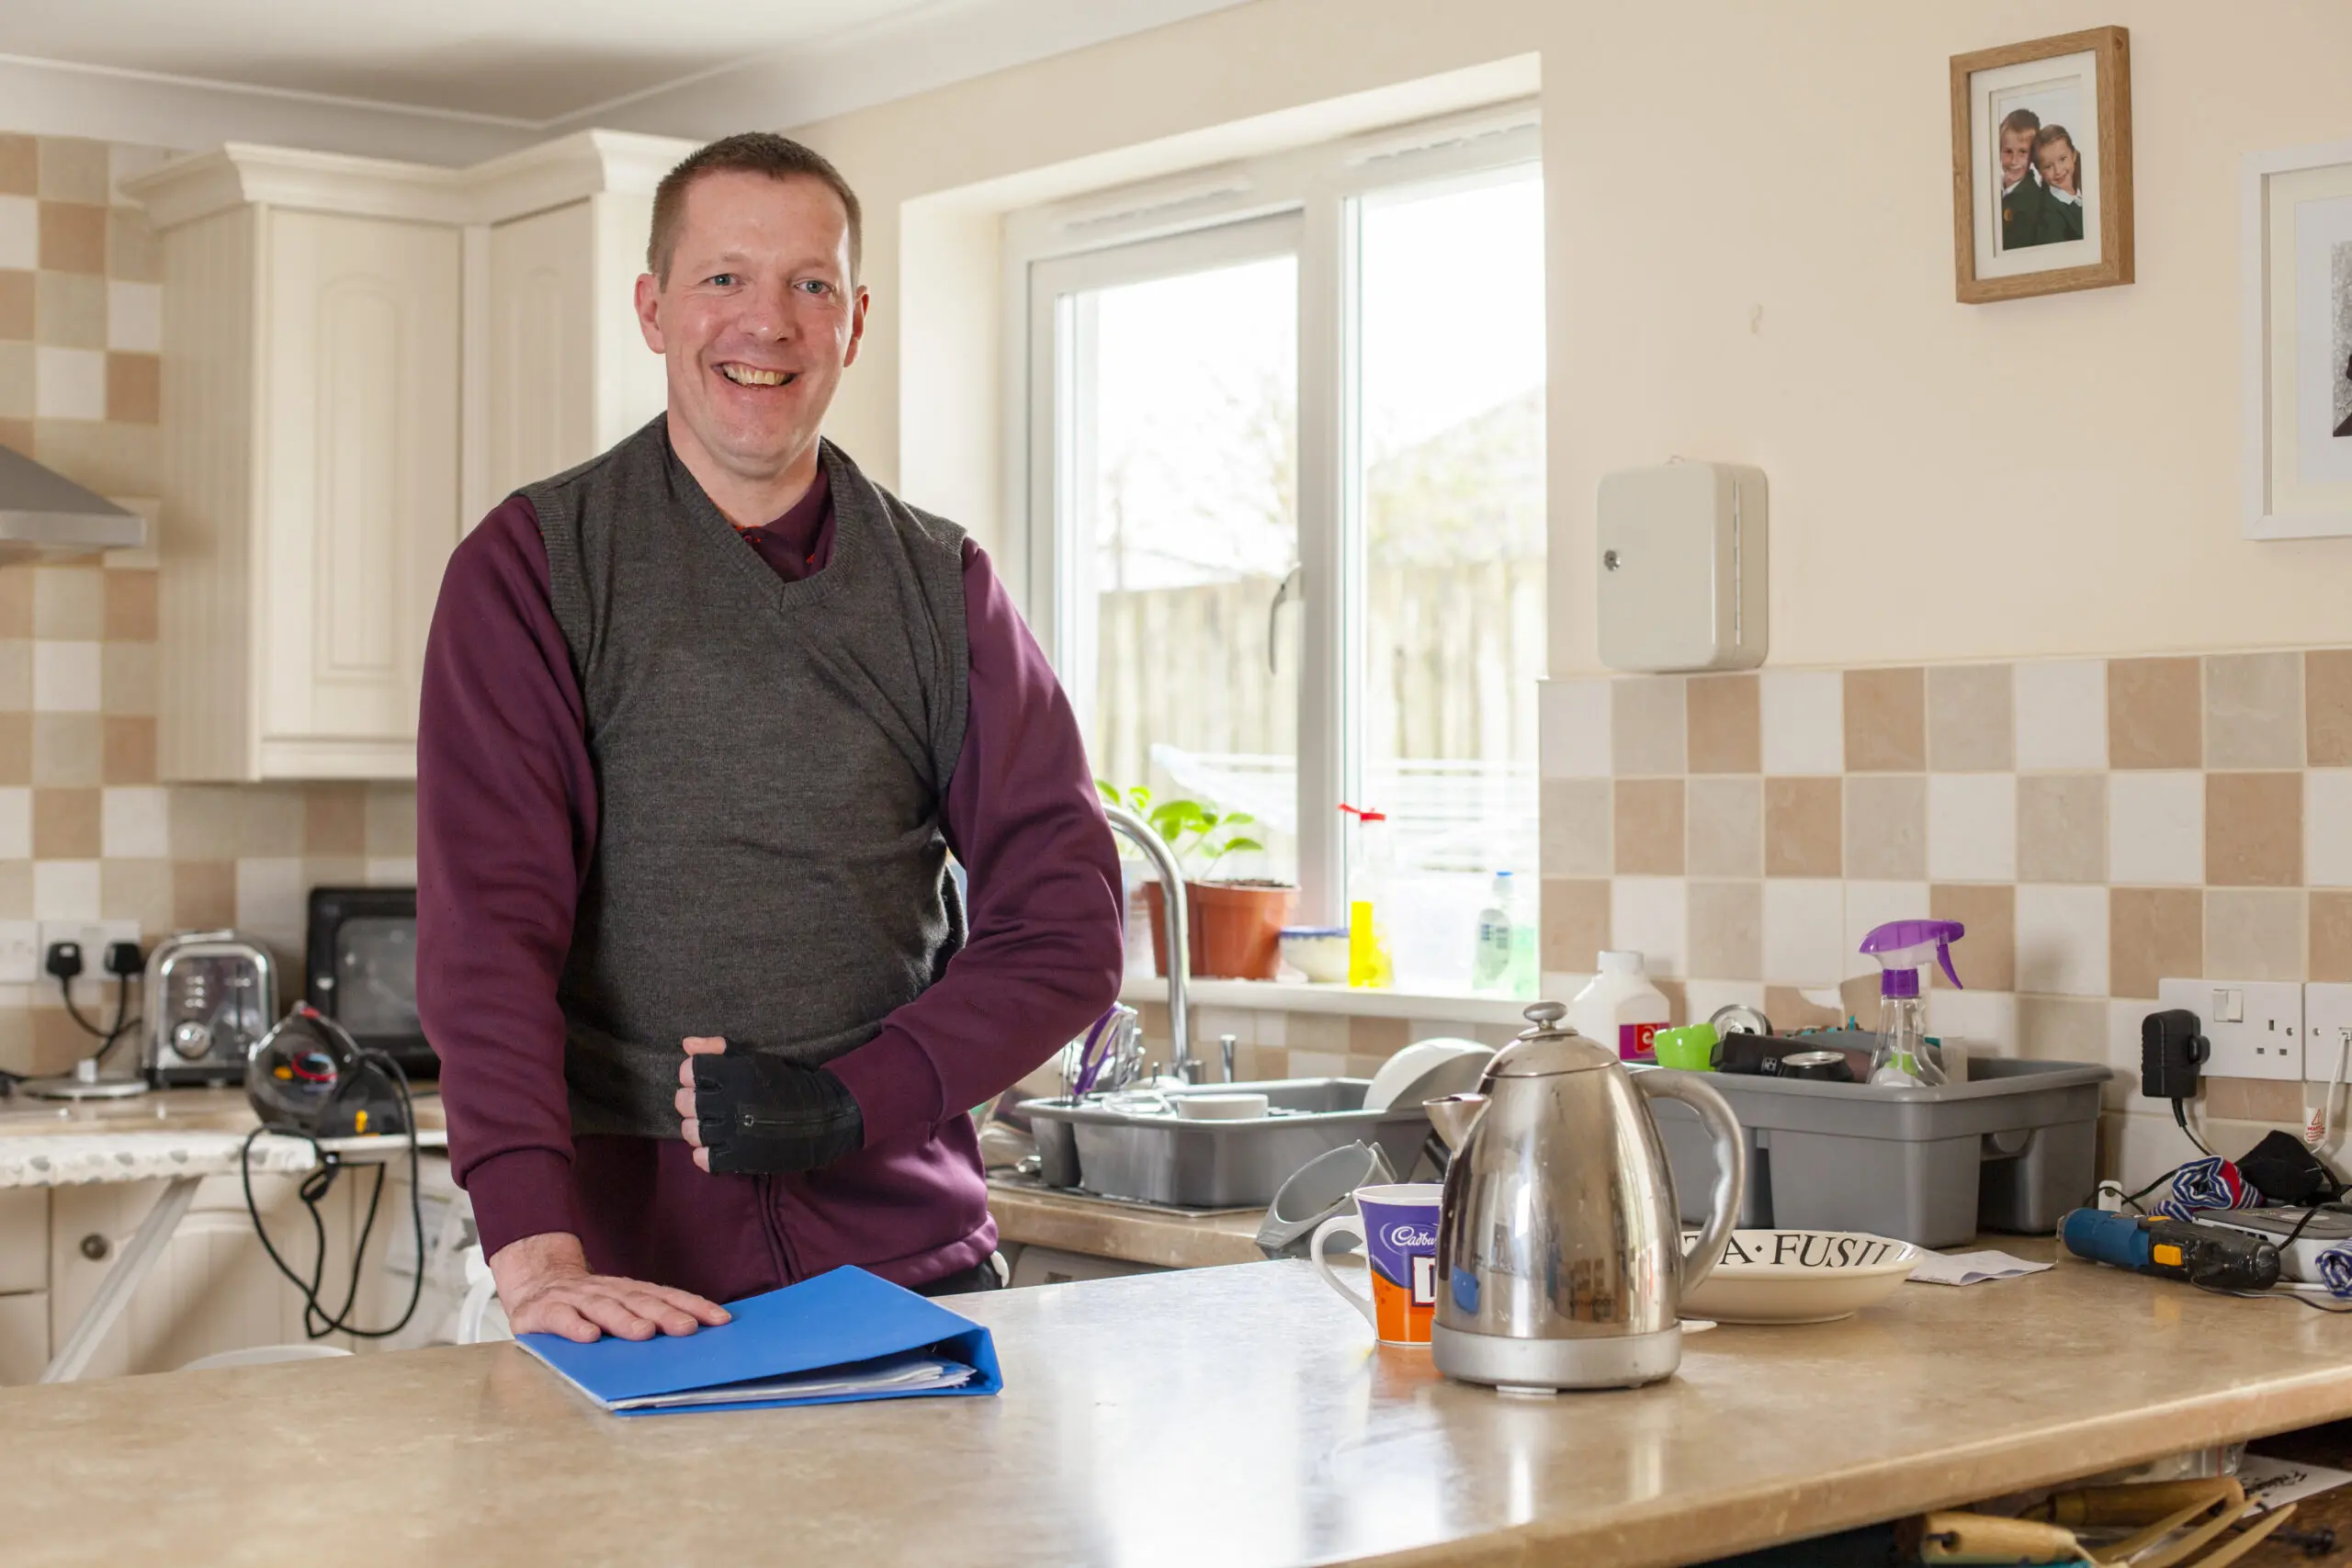 Ian Turner standing in his kitchen. He is smiling and leaning one hand on the counter top